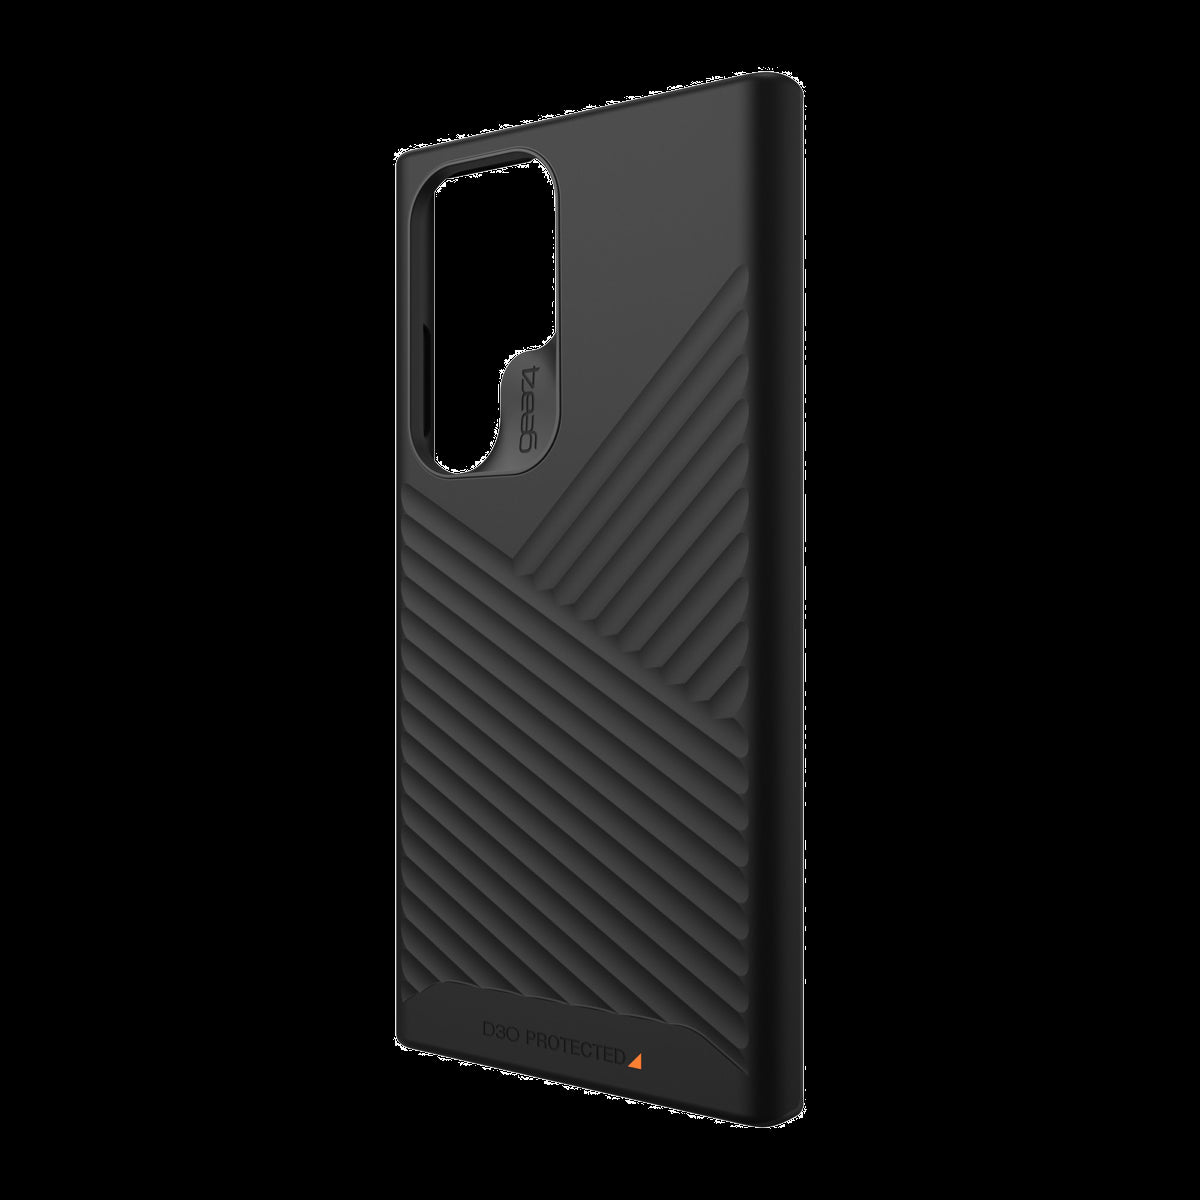 Gear4’s Denali case provides serious, up to 16-foot drop protection, thanks to the backplate that is reinforced with a layer of D3O® Bio material for ultimate protection.